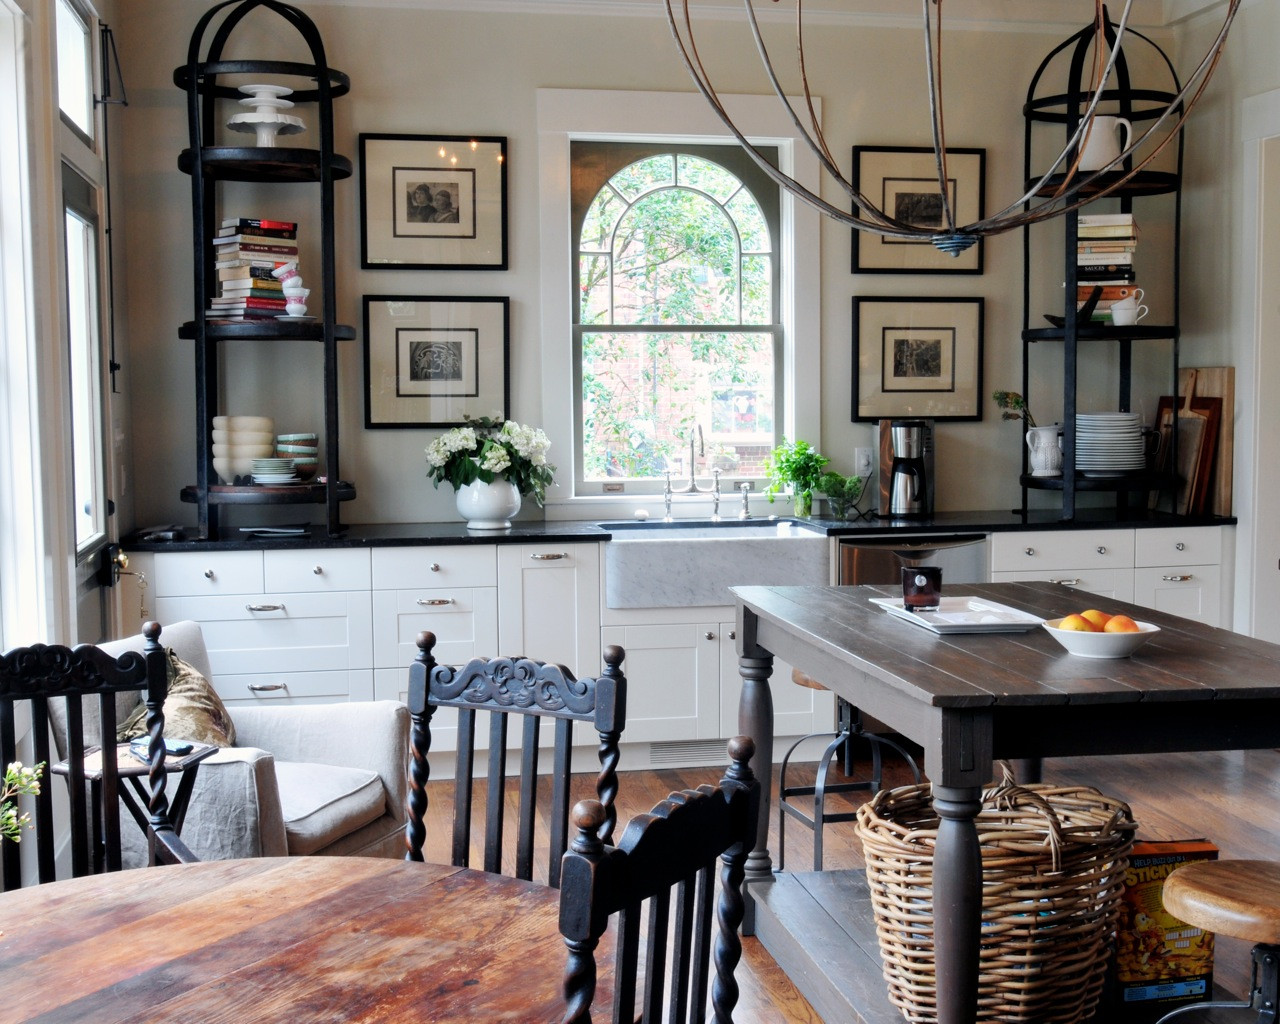 Rustic Chic Kitchen
 tupelo gold rustic chic room of the week 4 30